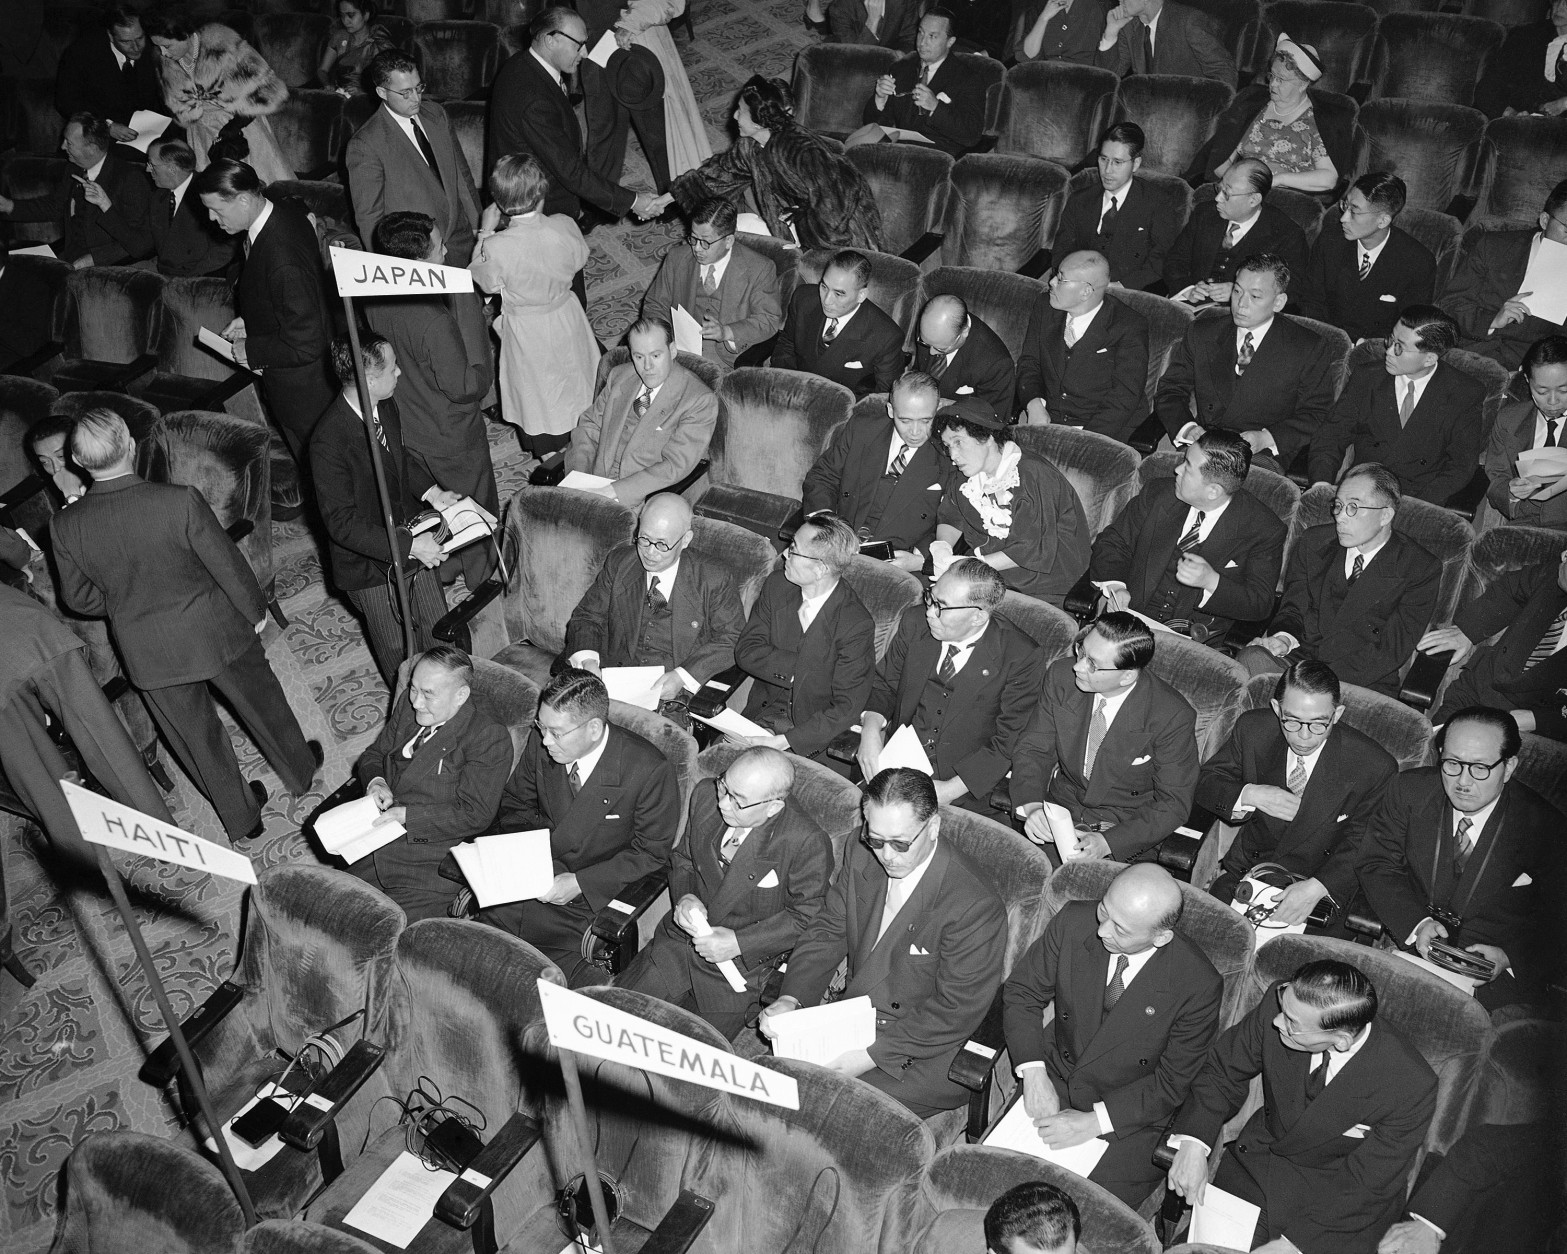 On this date in 1951, President Harry S. Truman addressed the nation from the Japanese peace treaty conference in San Francisco in the first live, coast-to-coast television broadcast. Here, the Japanese delegation to the peace treaty conference await Truman's speech. (AP Photo)